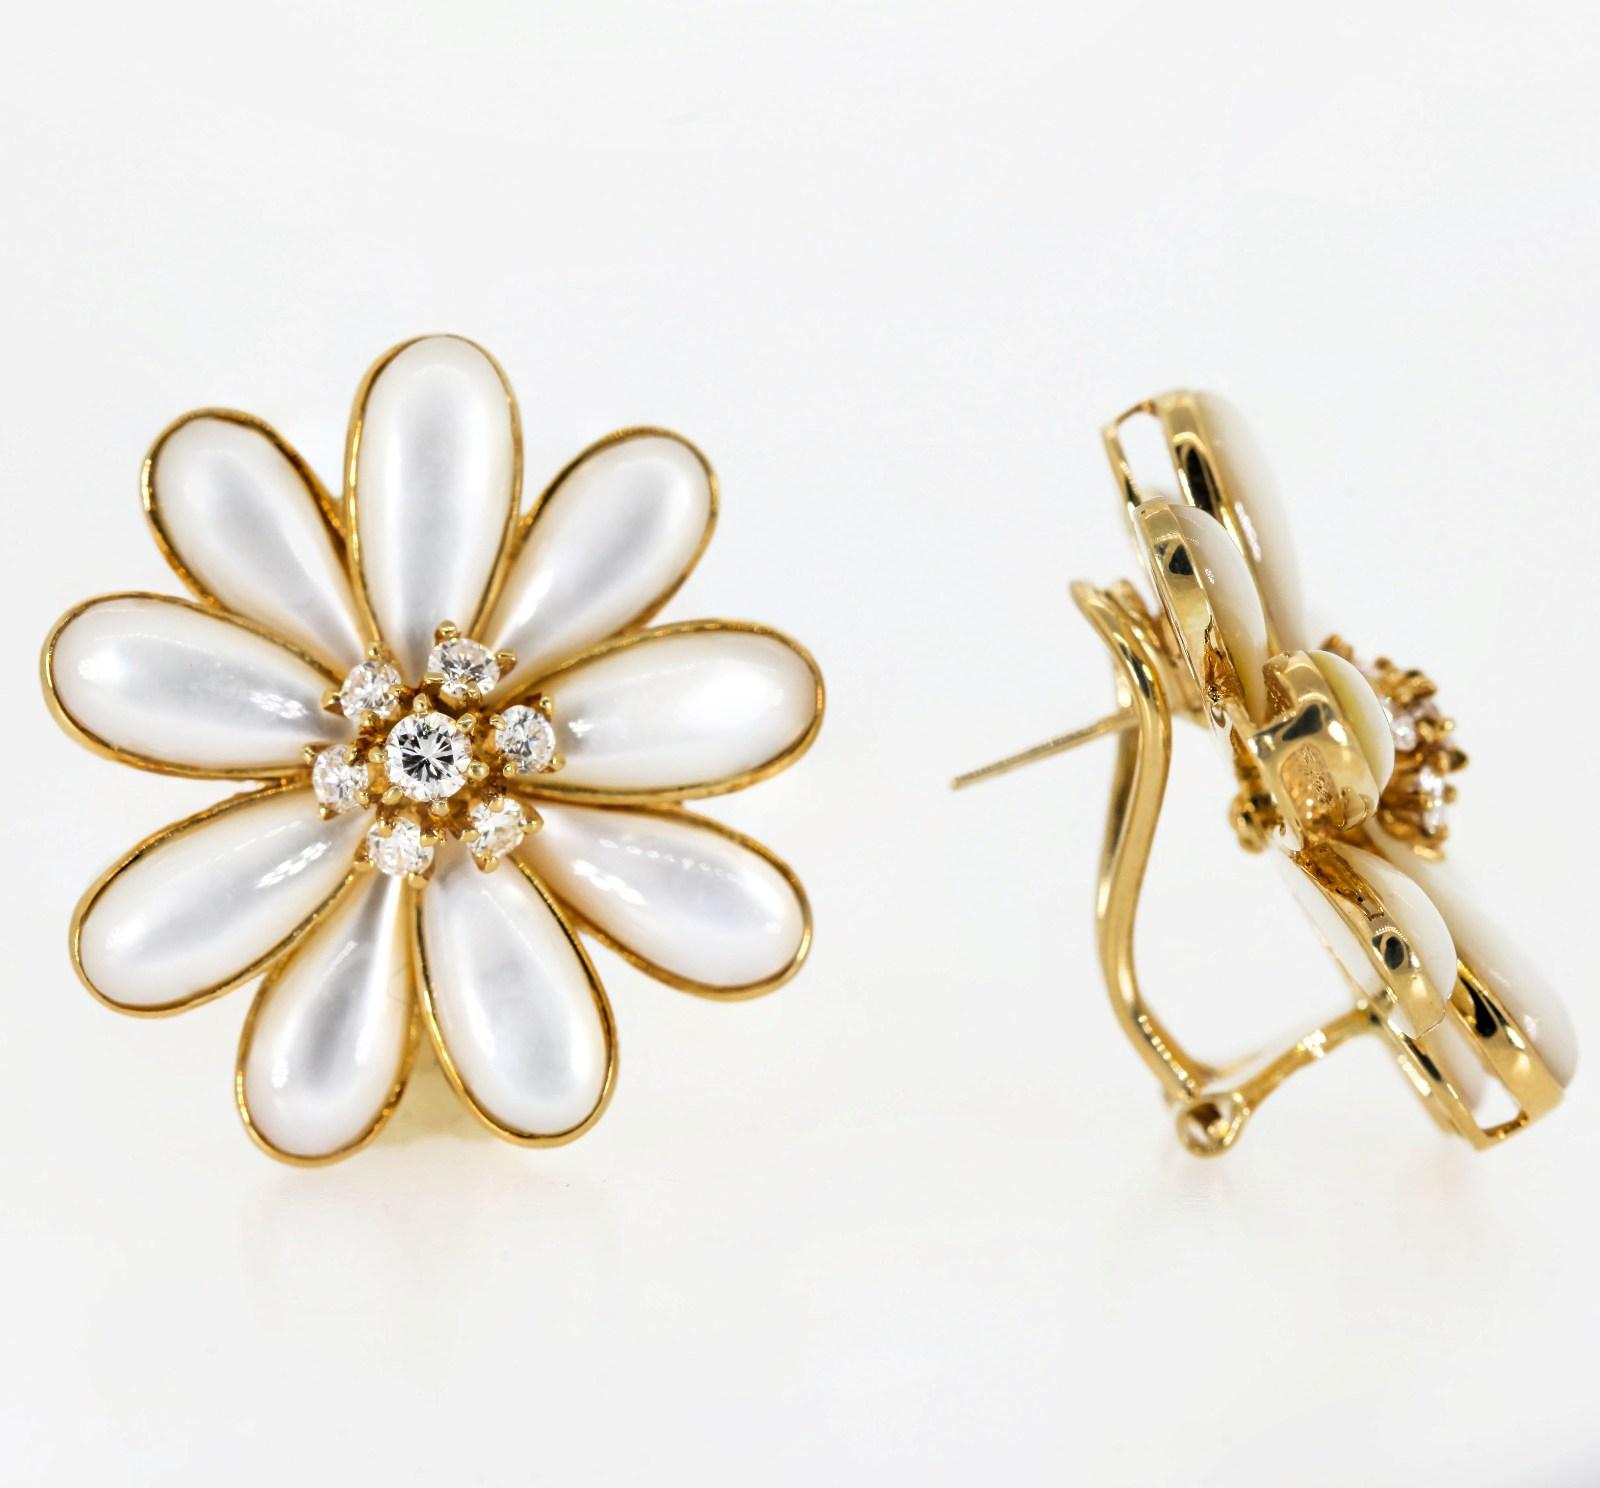 Welcome Spring with these contemporary 18KT yellow gold whimsical Mother of Pearl daisy flower earrings.  The pistil is gifted with a 0.85 carat of Round Brilliant cut Diamonds. The earrings are completed with a straight post and omega back.  They